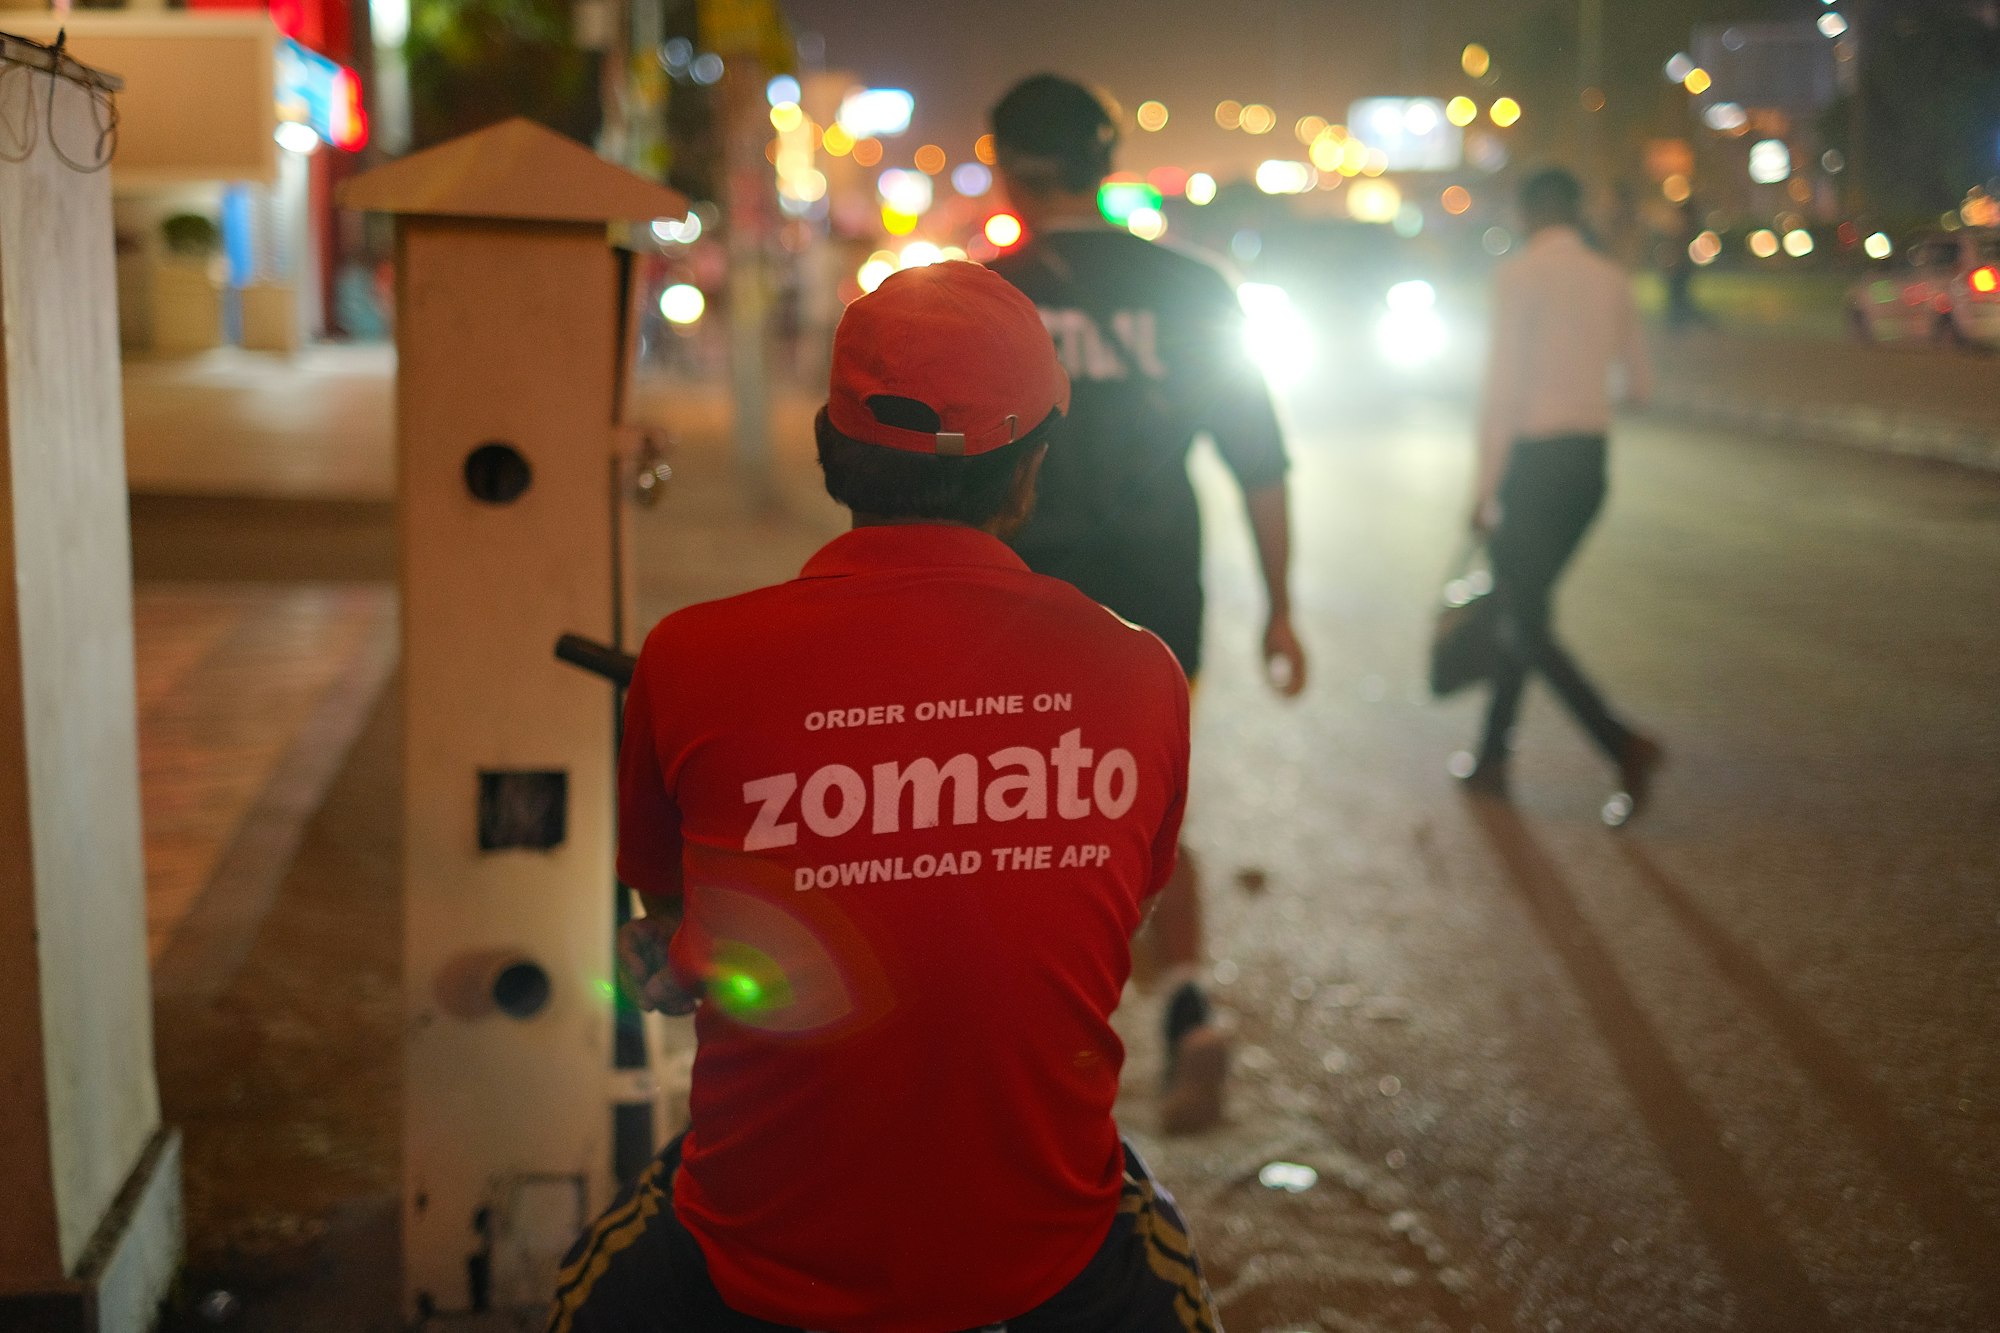 Indian food delivery giant Zomato to lay off 3% of its workforce